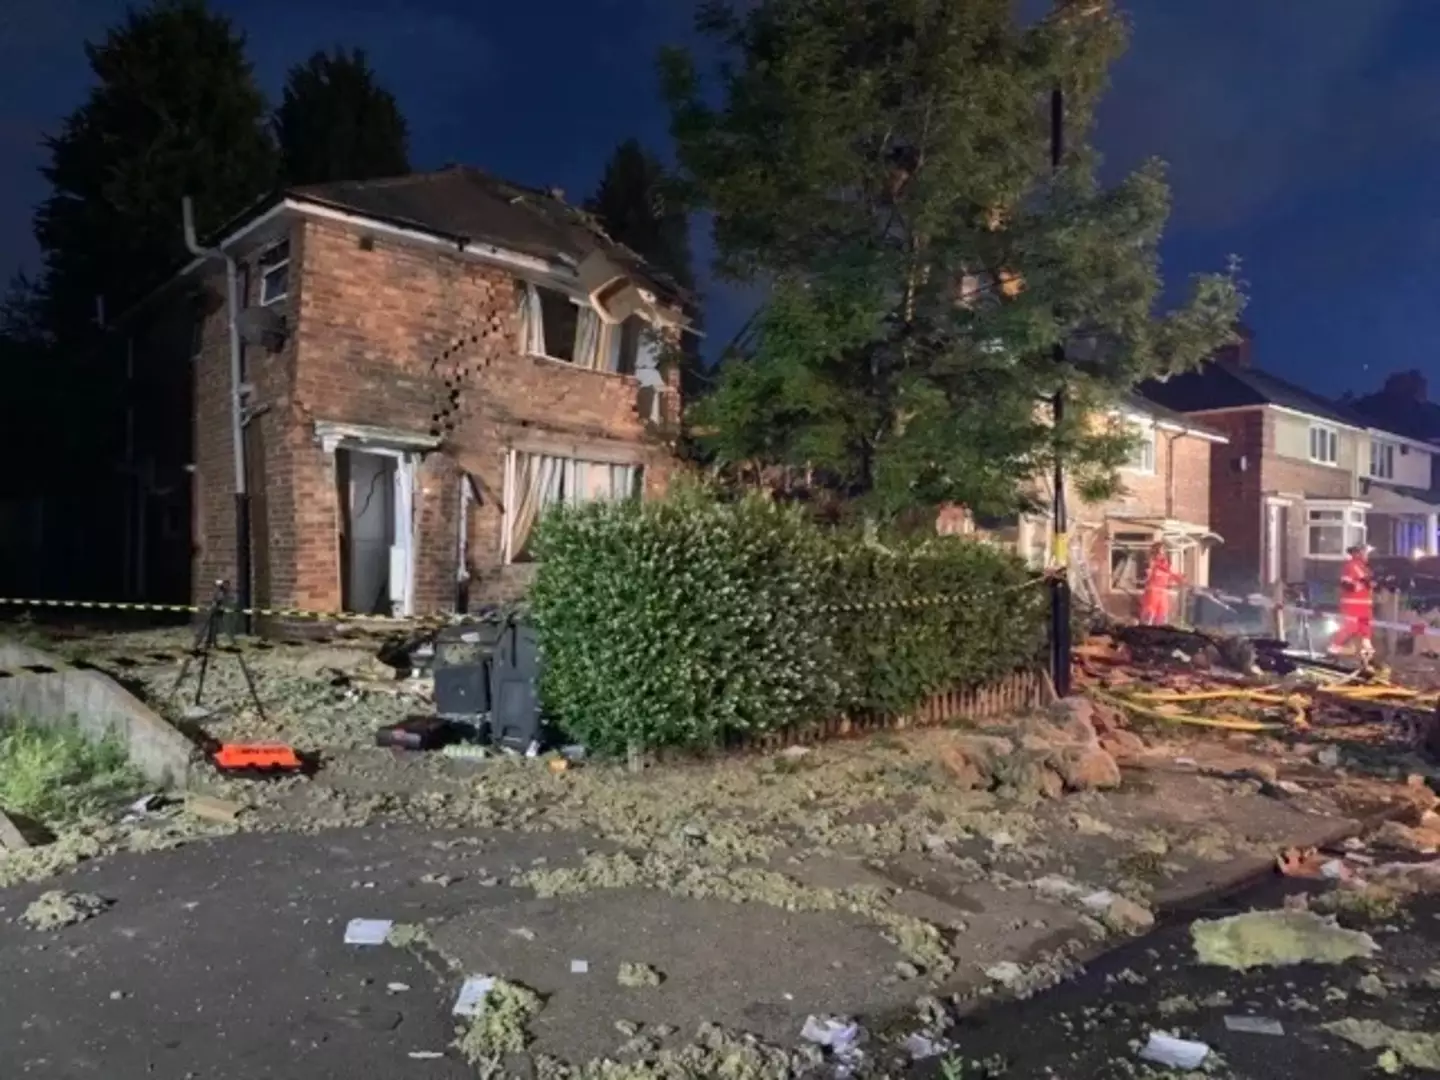 Neighbours were able to rescue one man from the rubble, though a woman has sadly died.